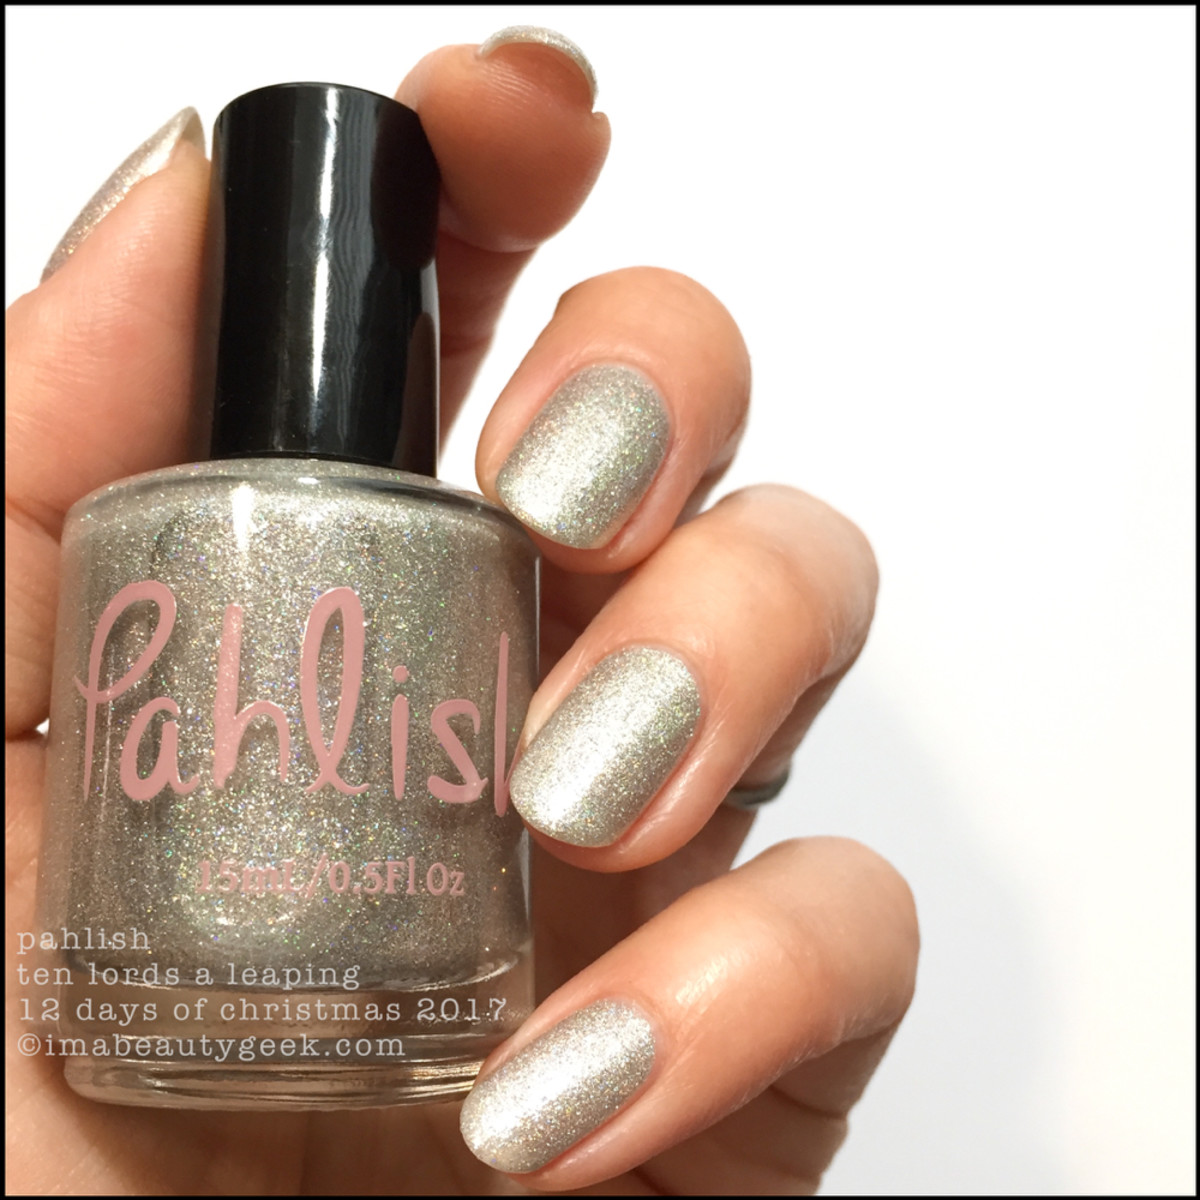 Pahlish Ten Lords a Leaping - Pahlish 12 Days of Christmas 2017 1